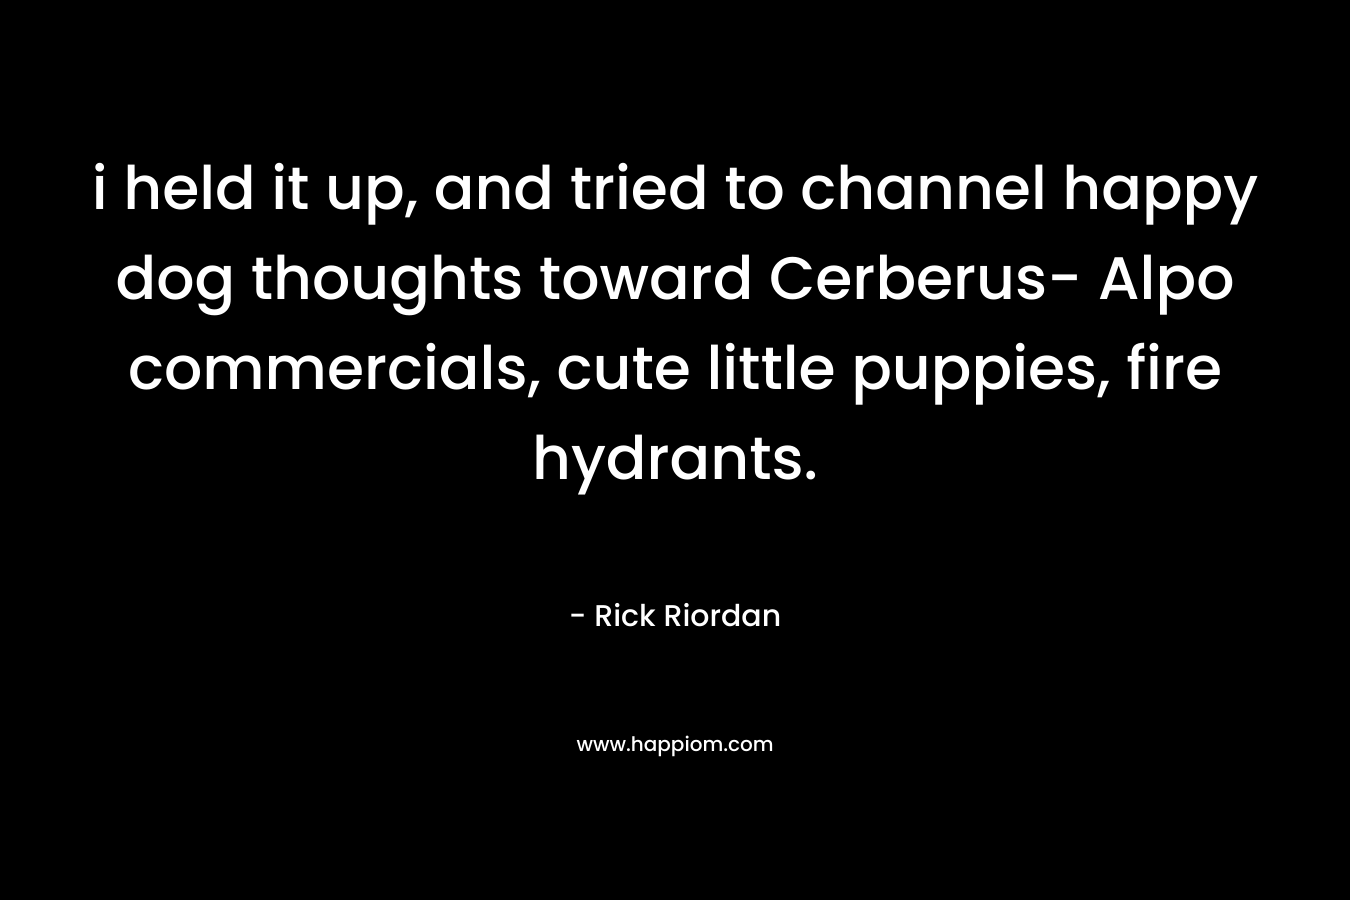 i held it up, and tried to channel happy dog thoughts toward Cerberus- Alpo commercials, cute little puppies, fire hydrants. – Rick Riordan